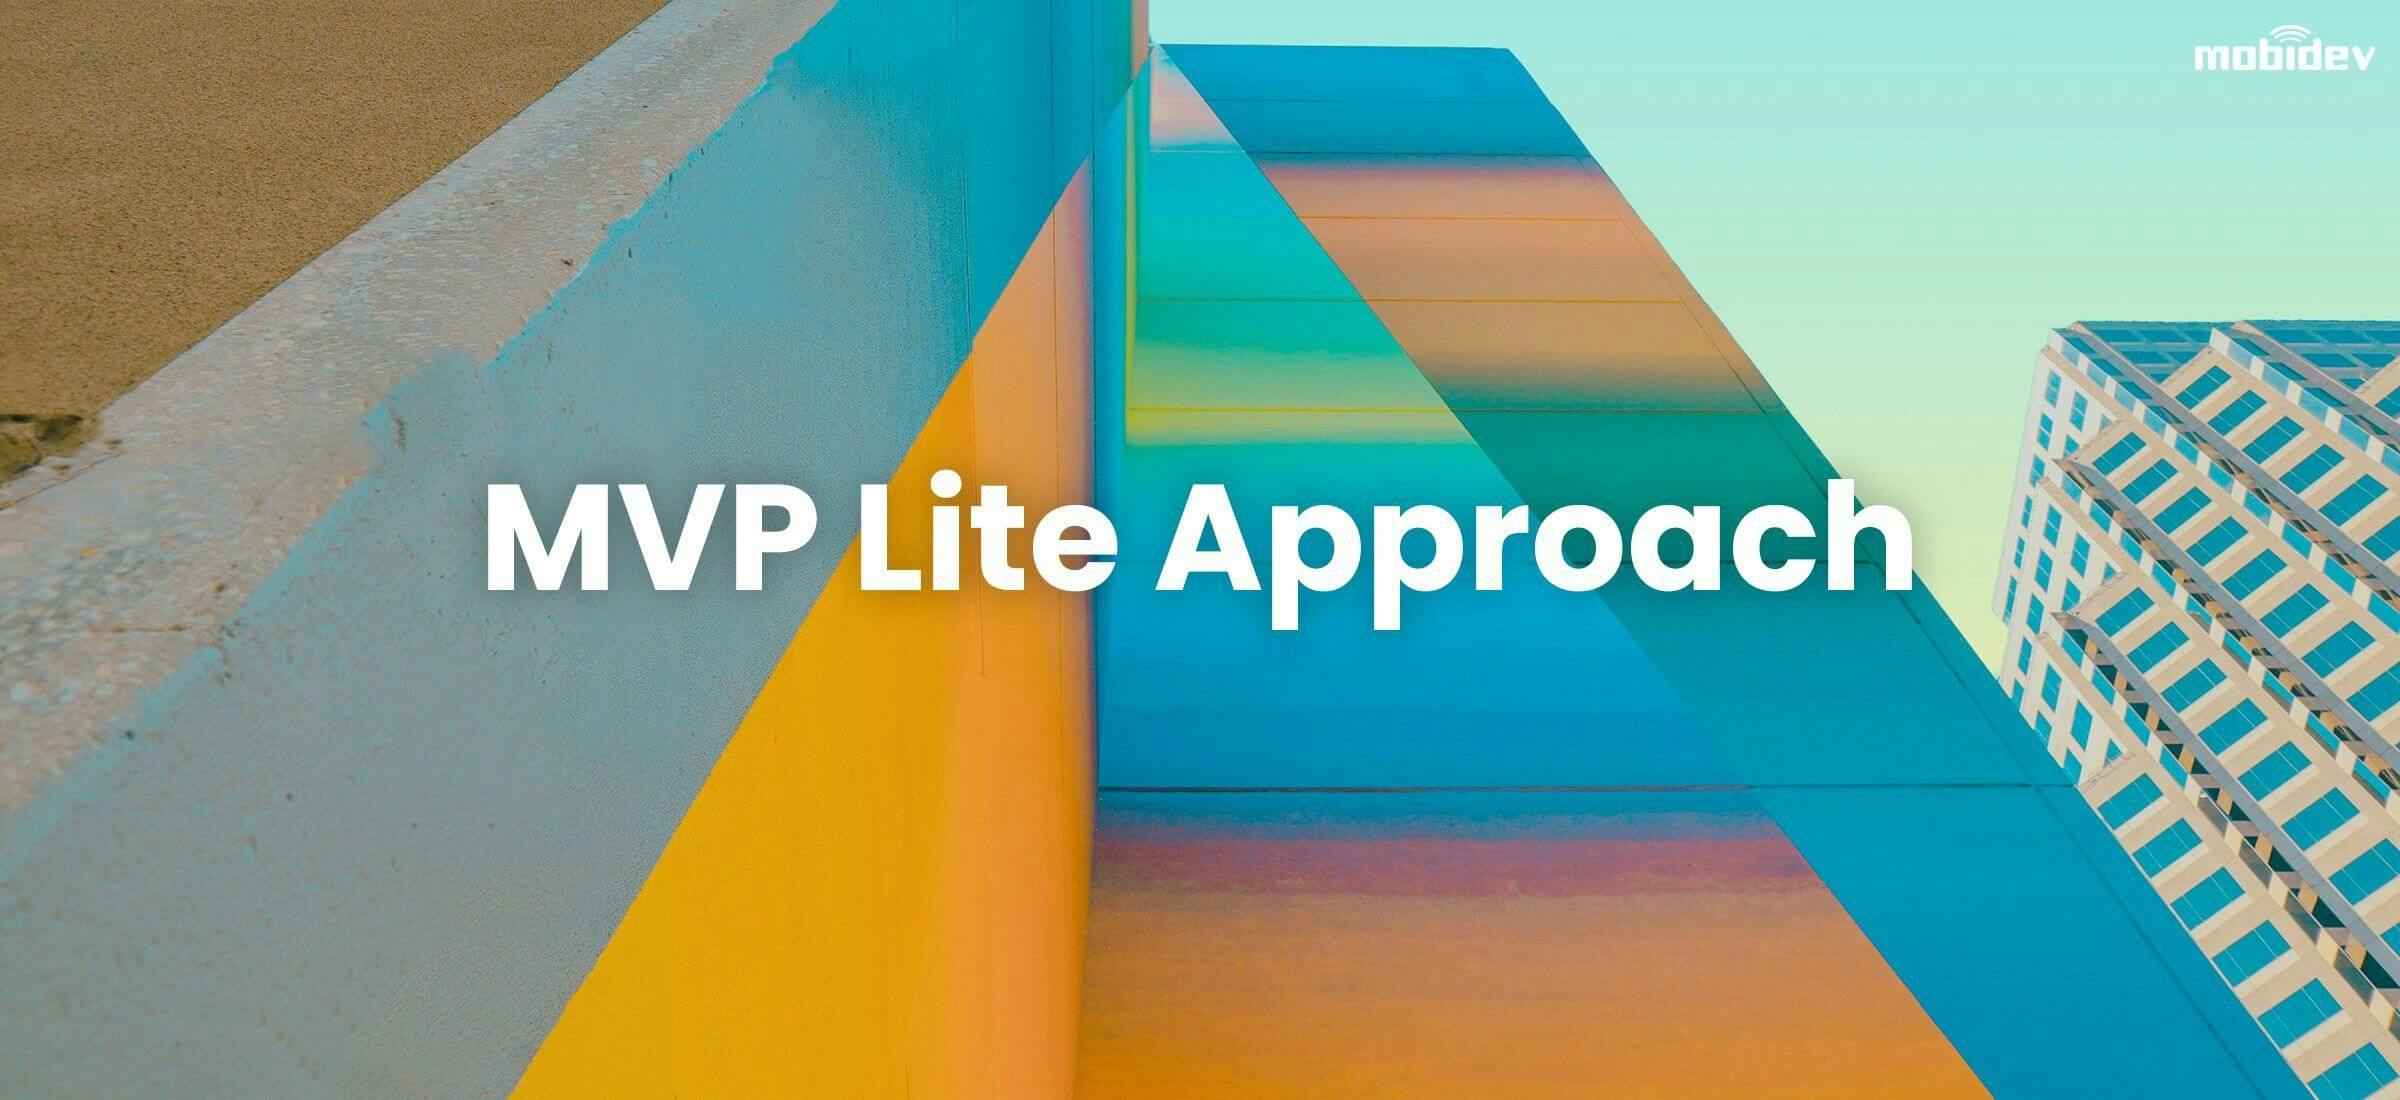 /the-mvp-lite-approach-a-software-development-approach-for-2021-and-beyond-se3734bk feature image